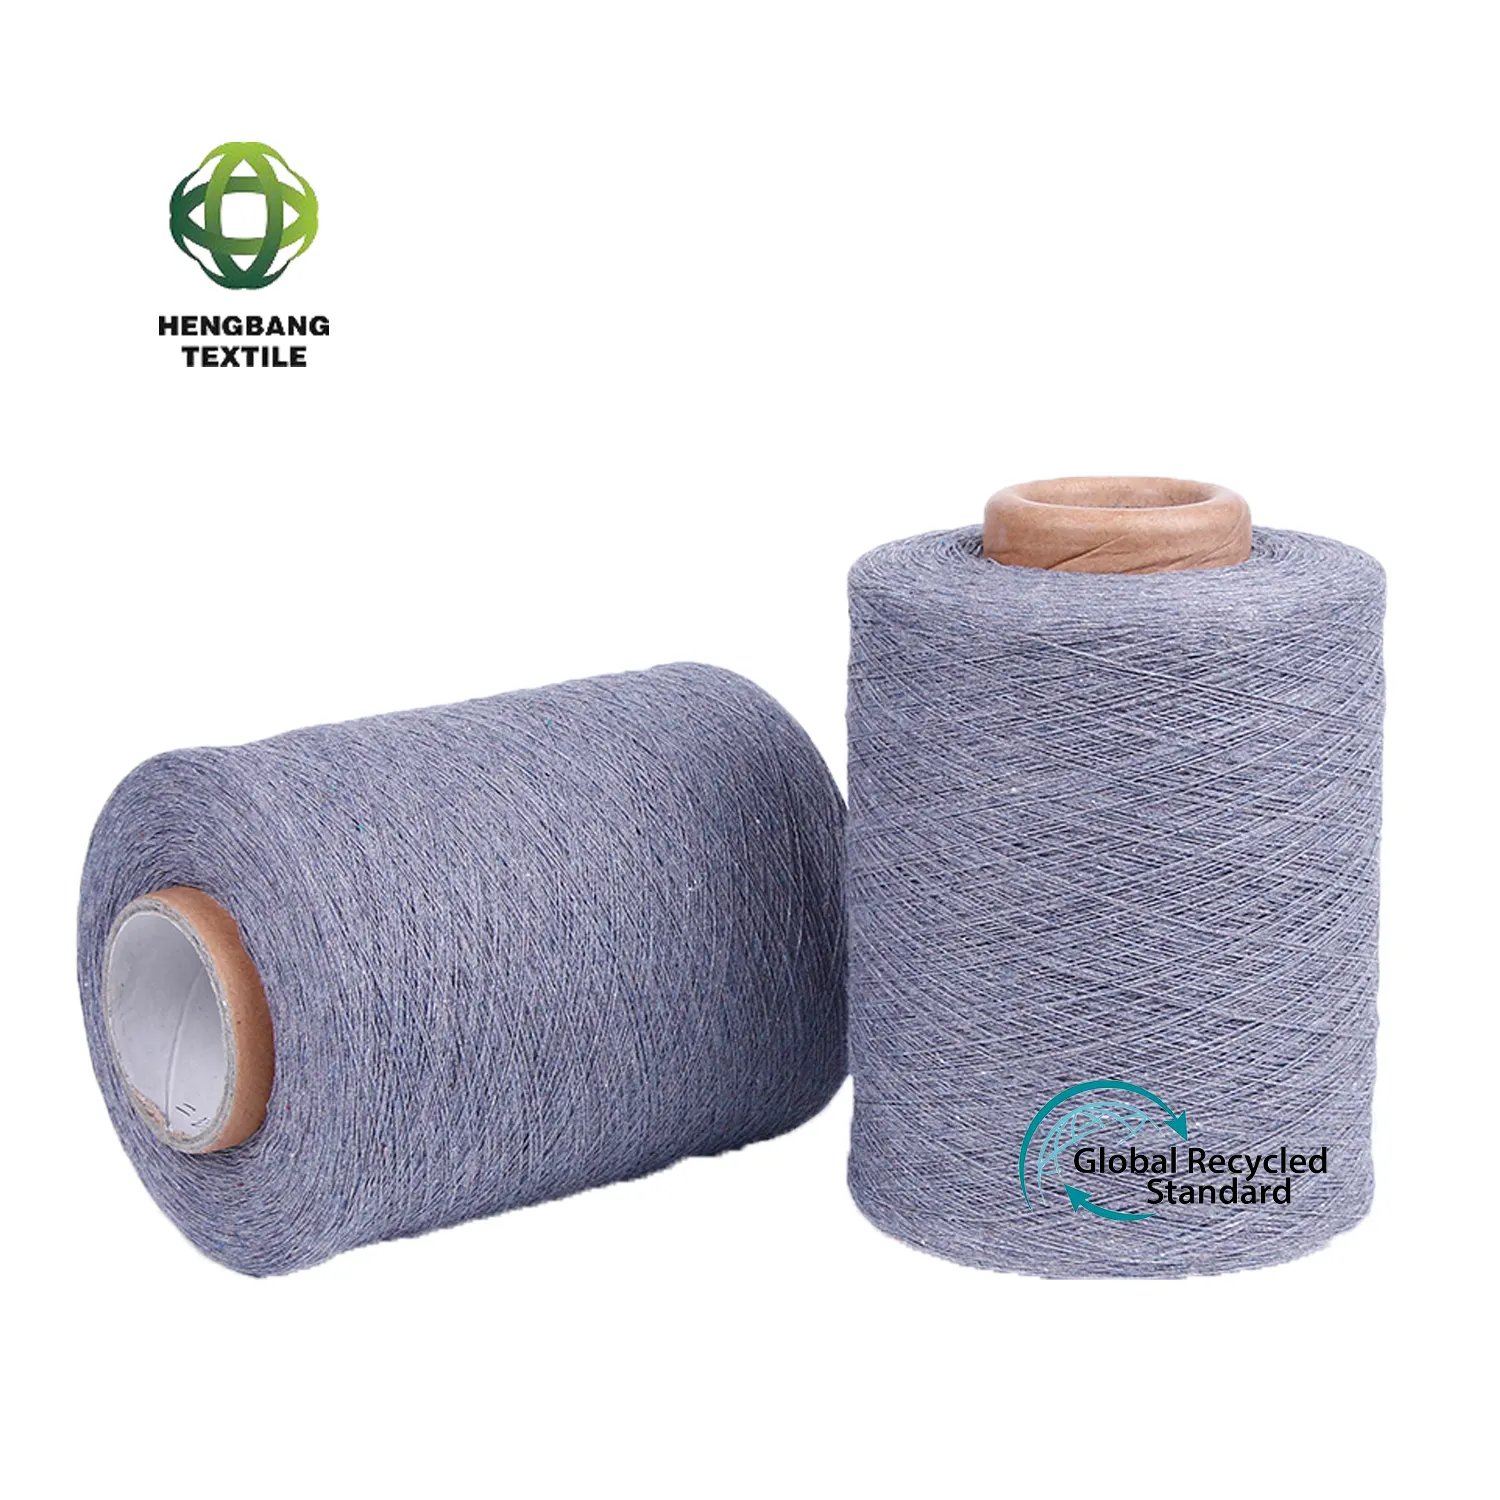 Recycled OE Cotton Polyester Blended Yarn Knitting Yarn T Shirt Yarn Manufacturer